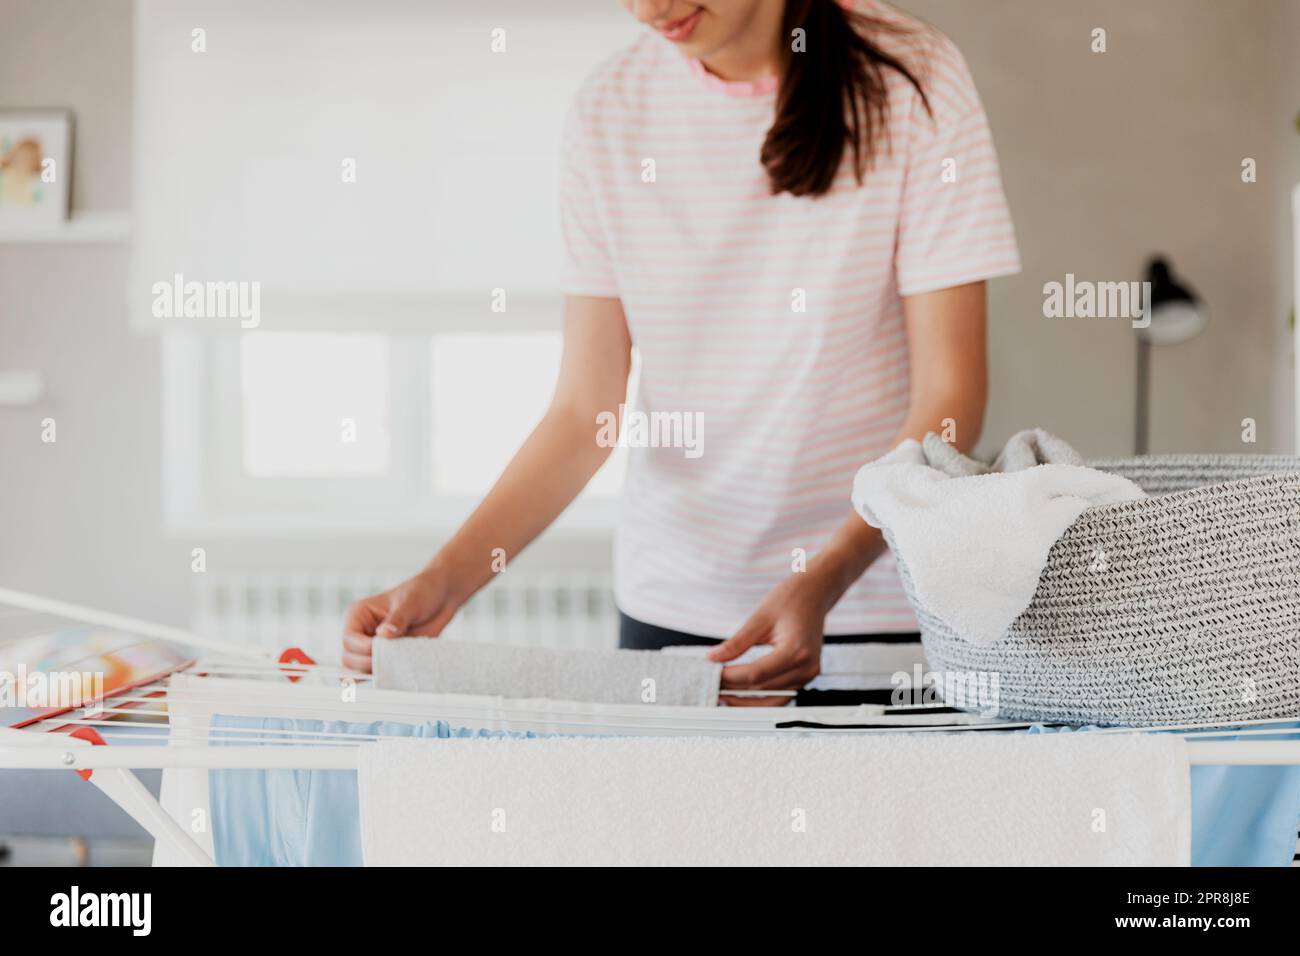 Happy woman smiling, hanging clean wet clothes laundry on drying rack at home Stock Photo